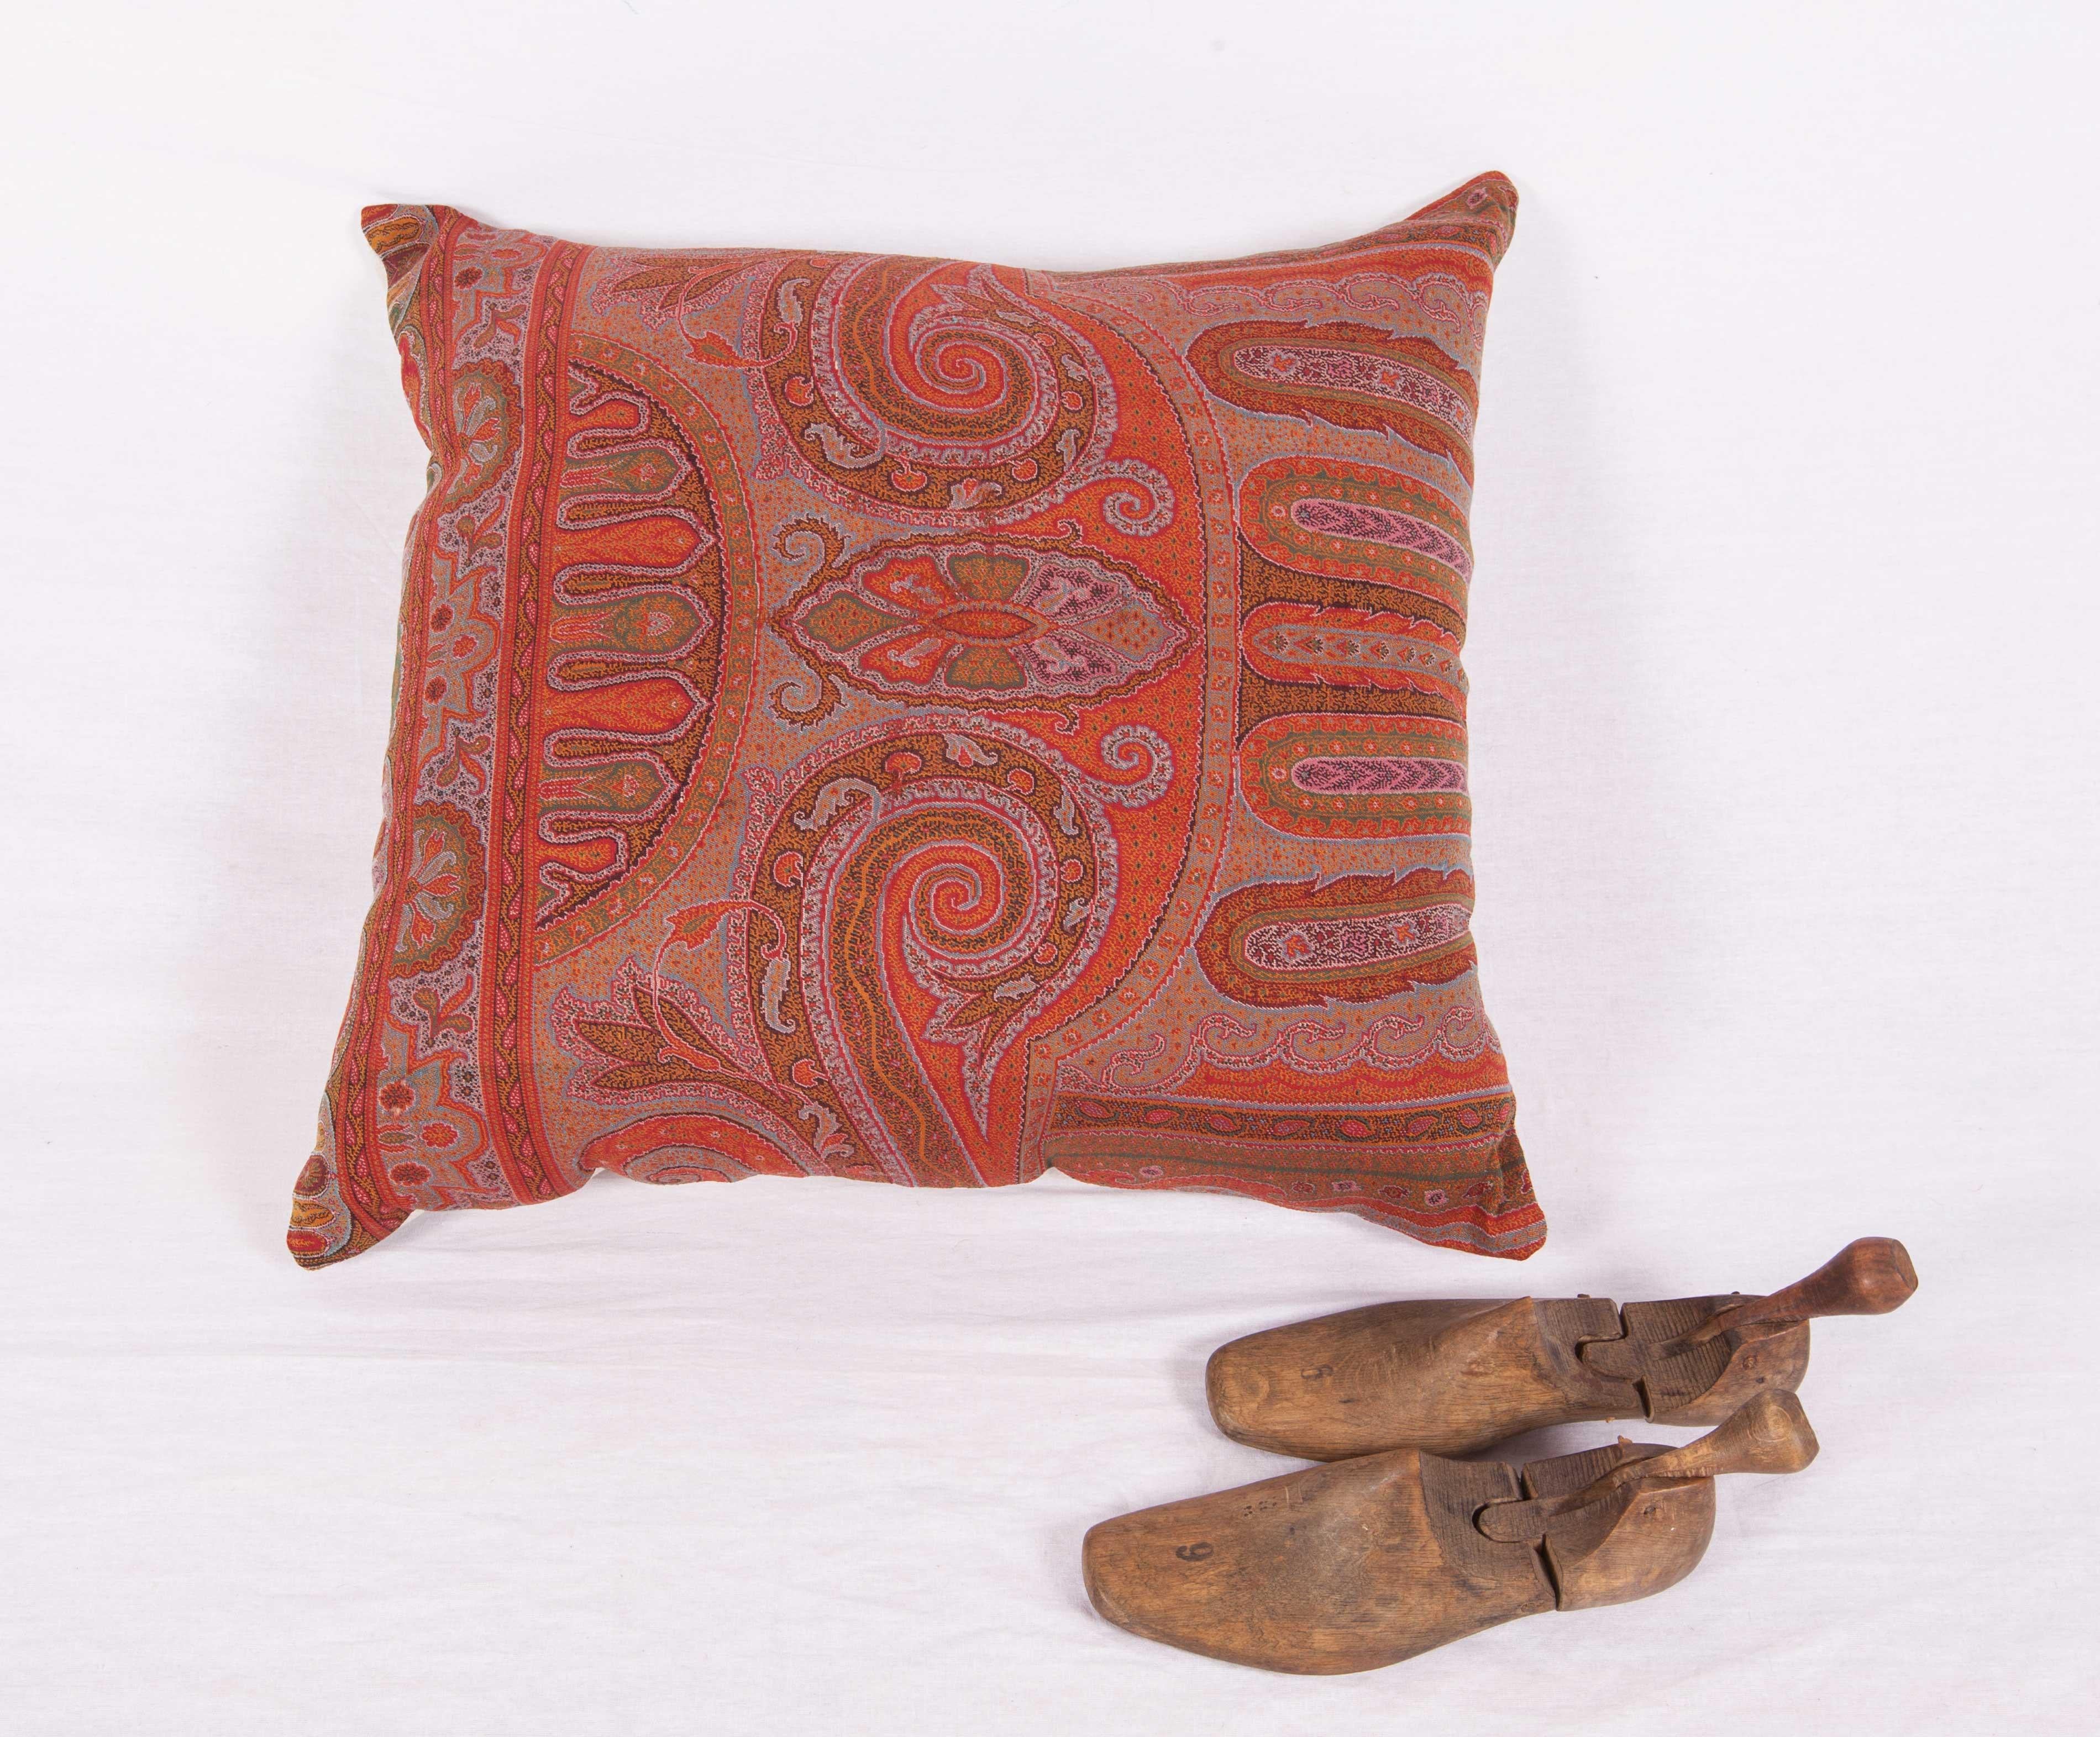 The pillow is made out of a early 19th century paisley shawl. It does not come with an insert but it comes with a bag made to the size and out of cotton to accommodate the filling. The backing is made of linen. Please Note: Filling is not provided.